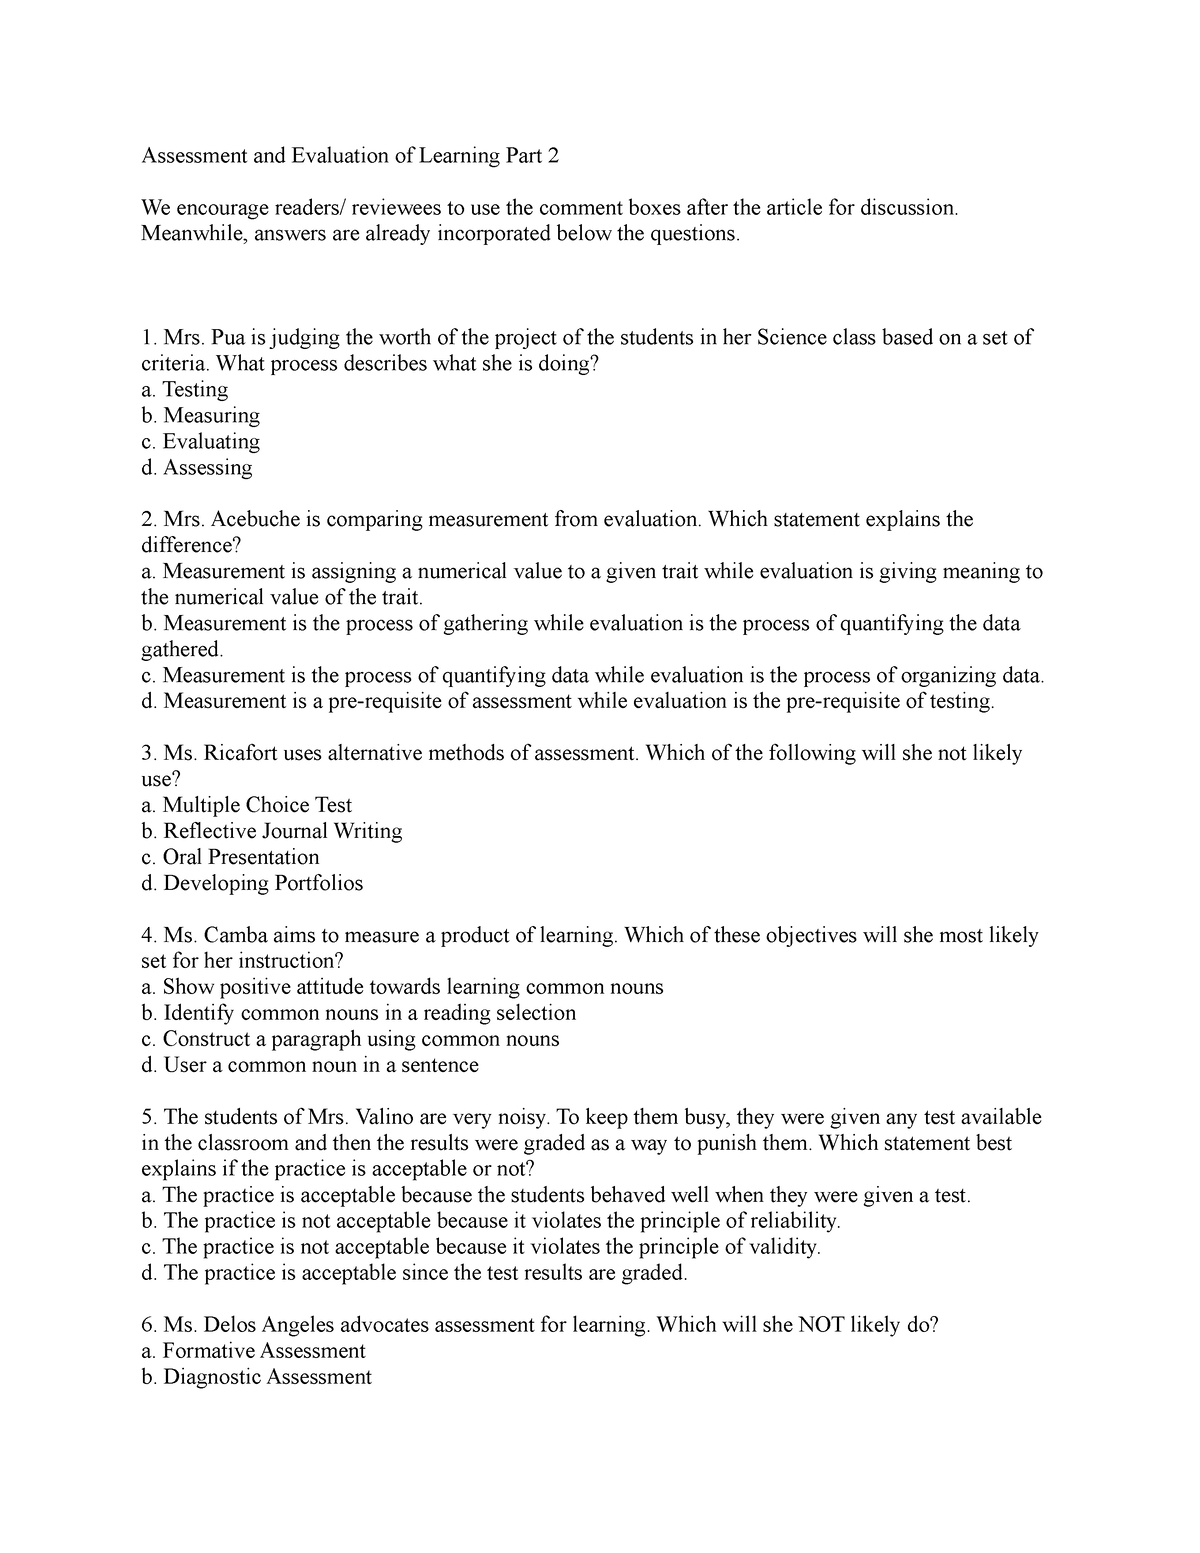 Assessment And Evaluation Of Learning Part 2 - Meanwhile, Answers Are 